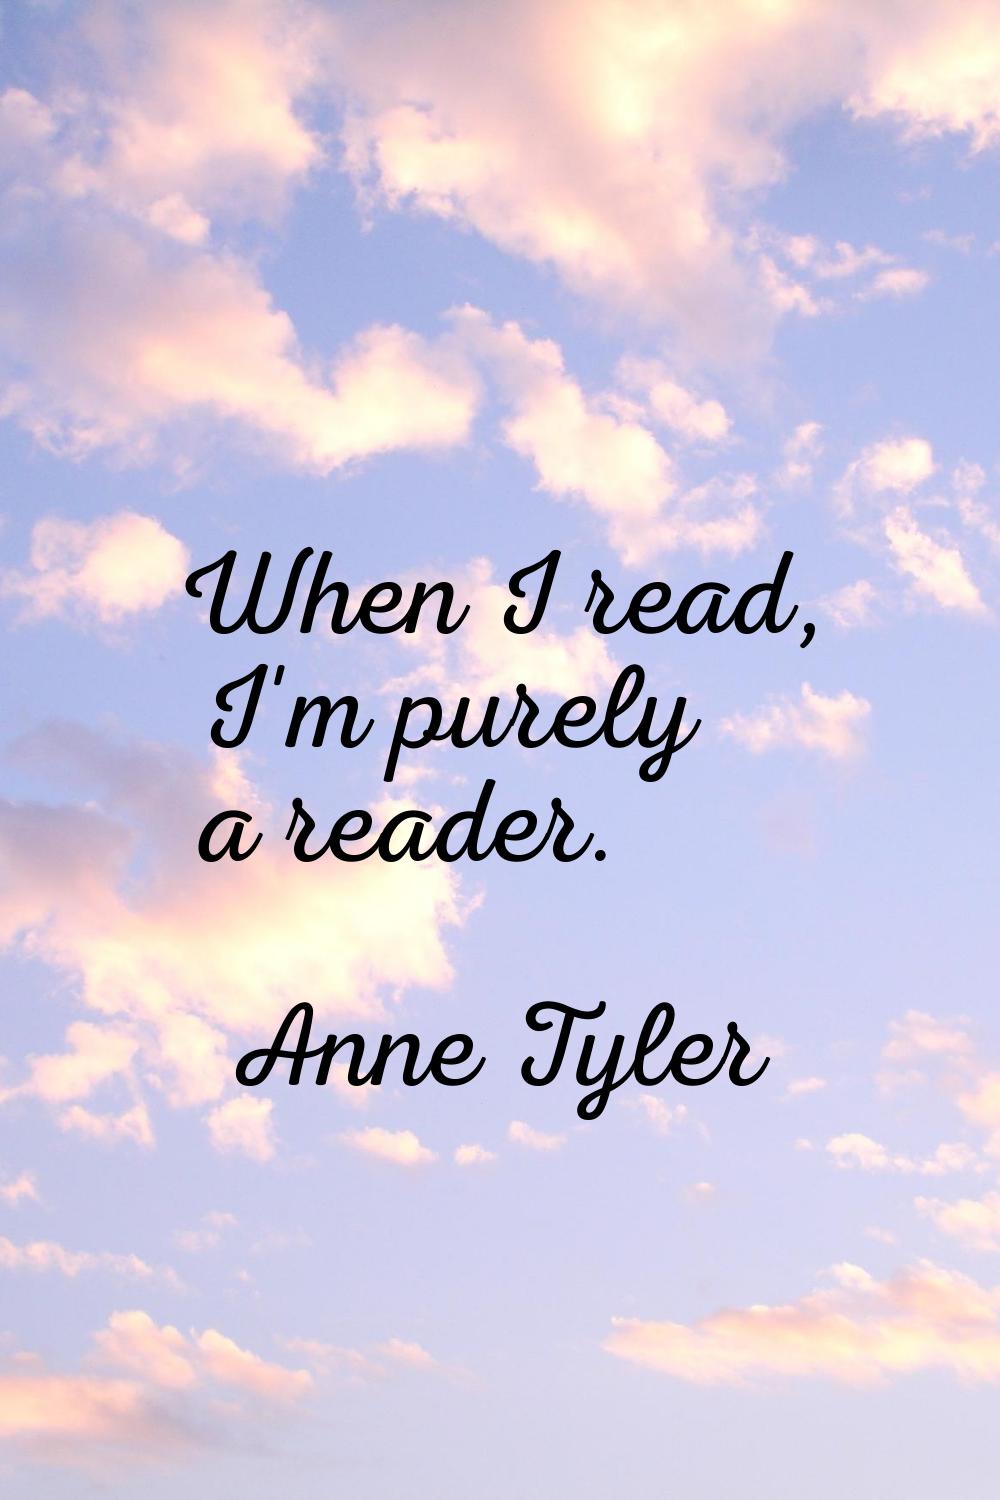 When I read, I'm purely a reader.